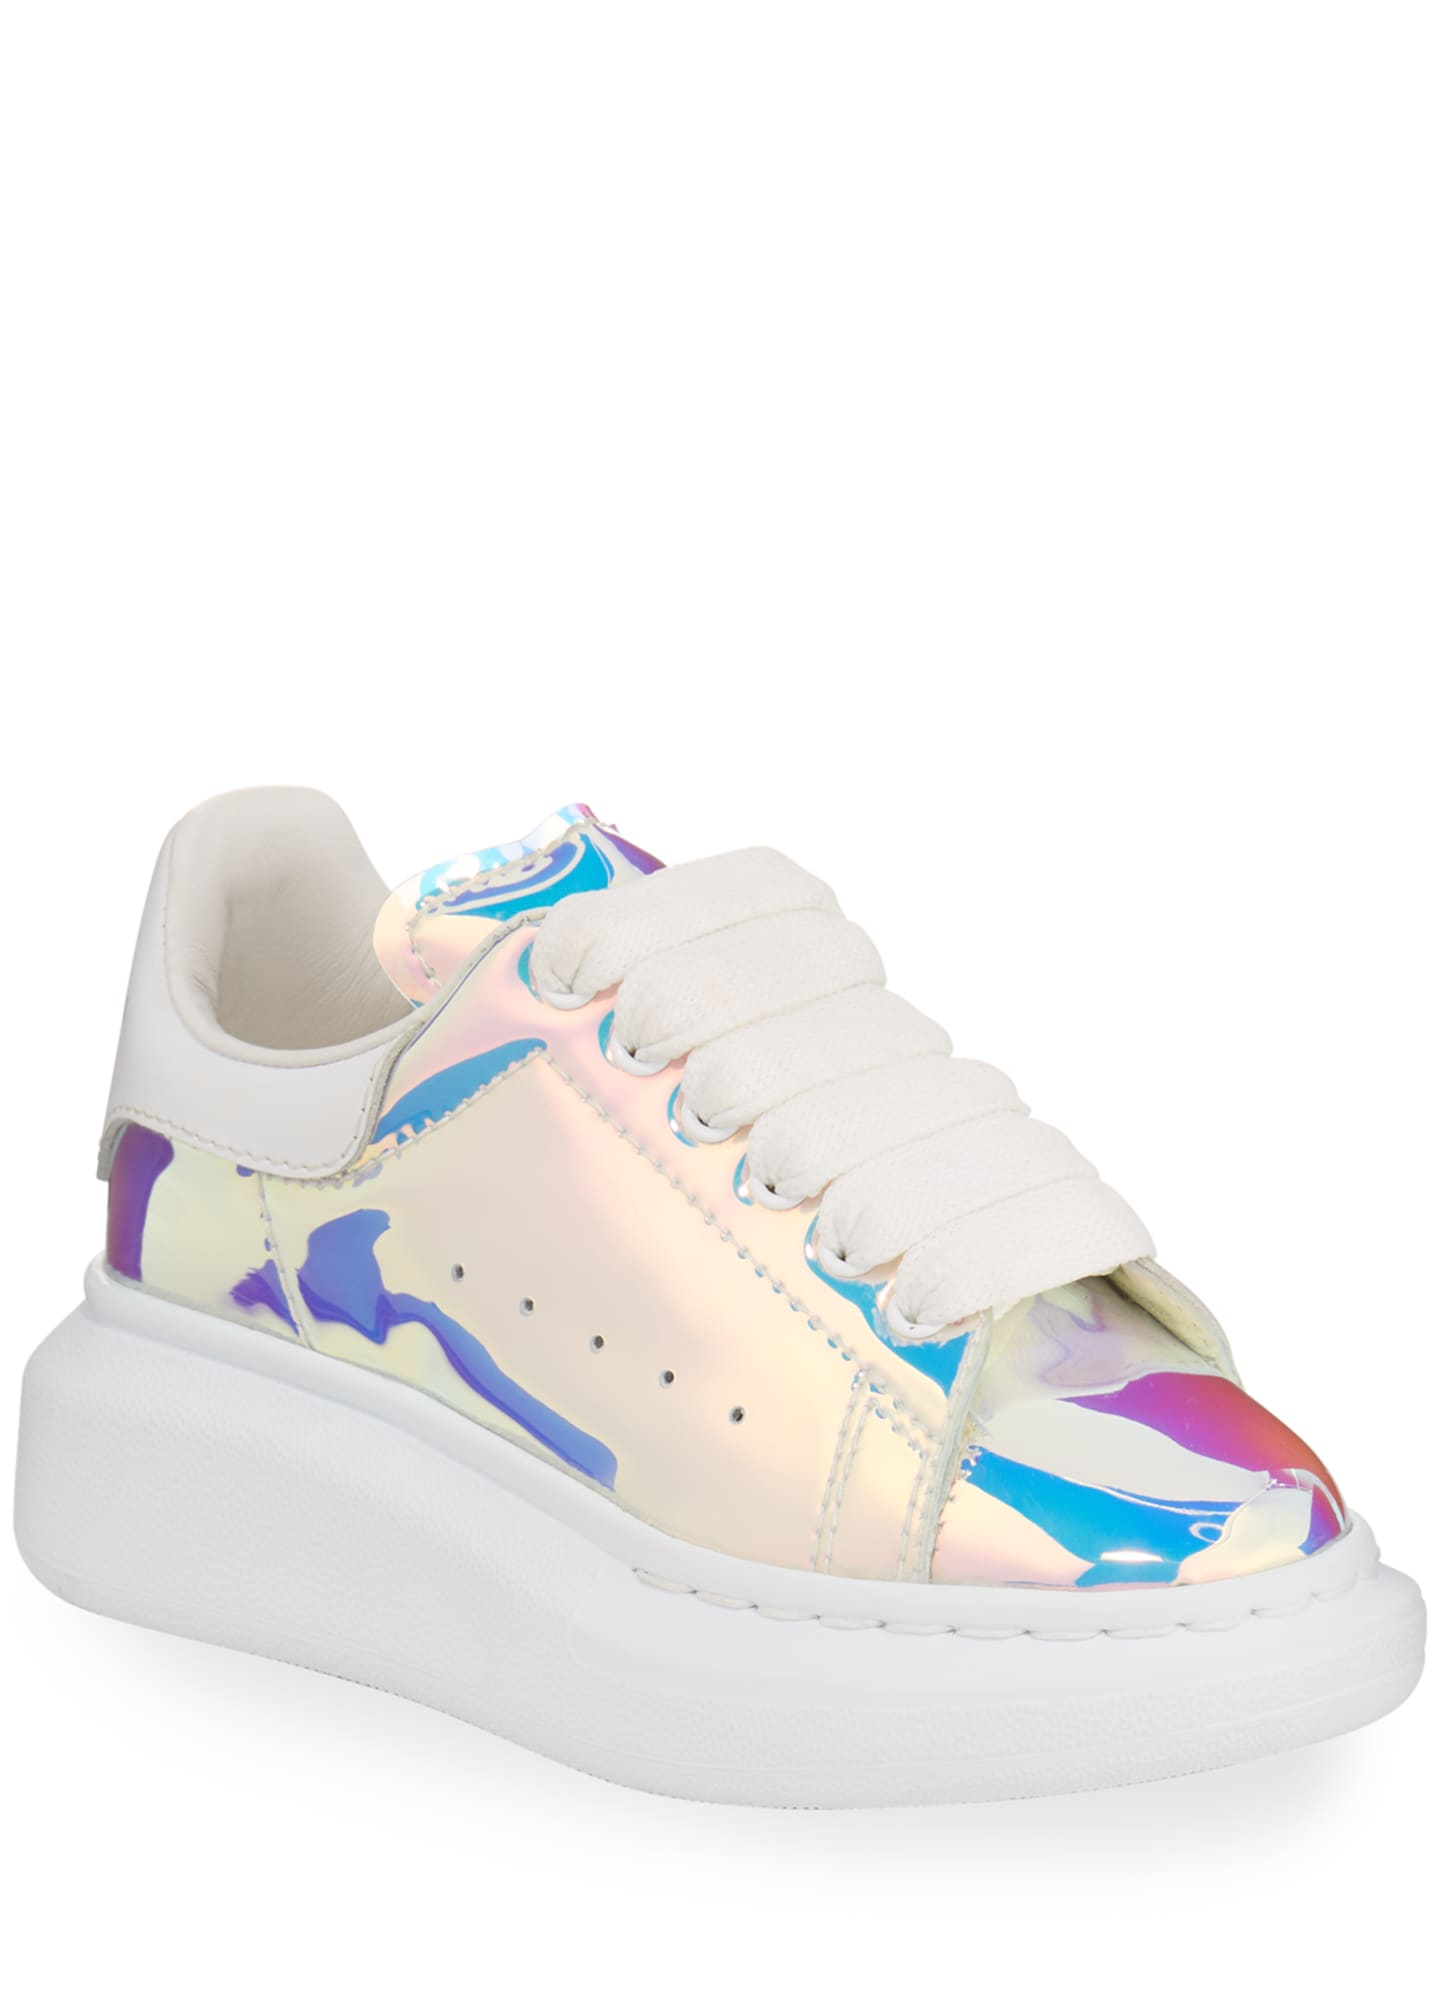 holographic tennis shoes